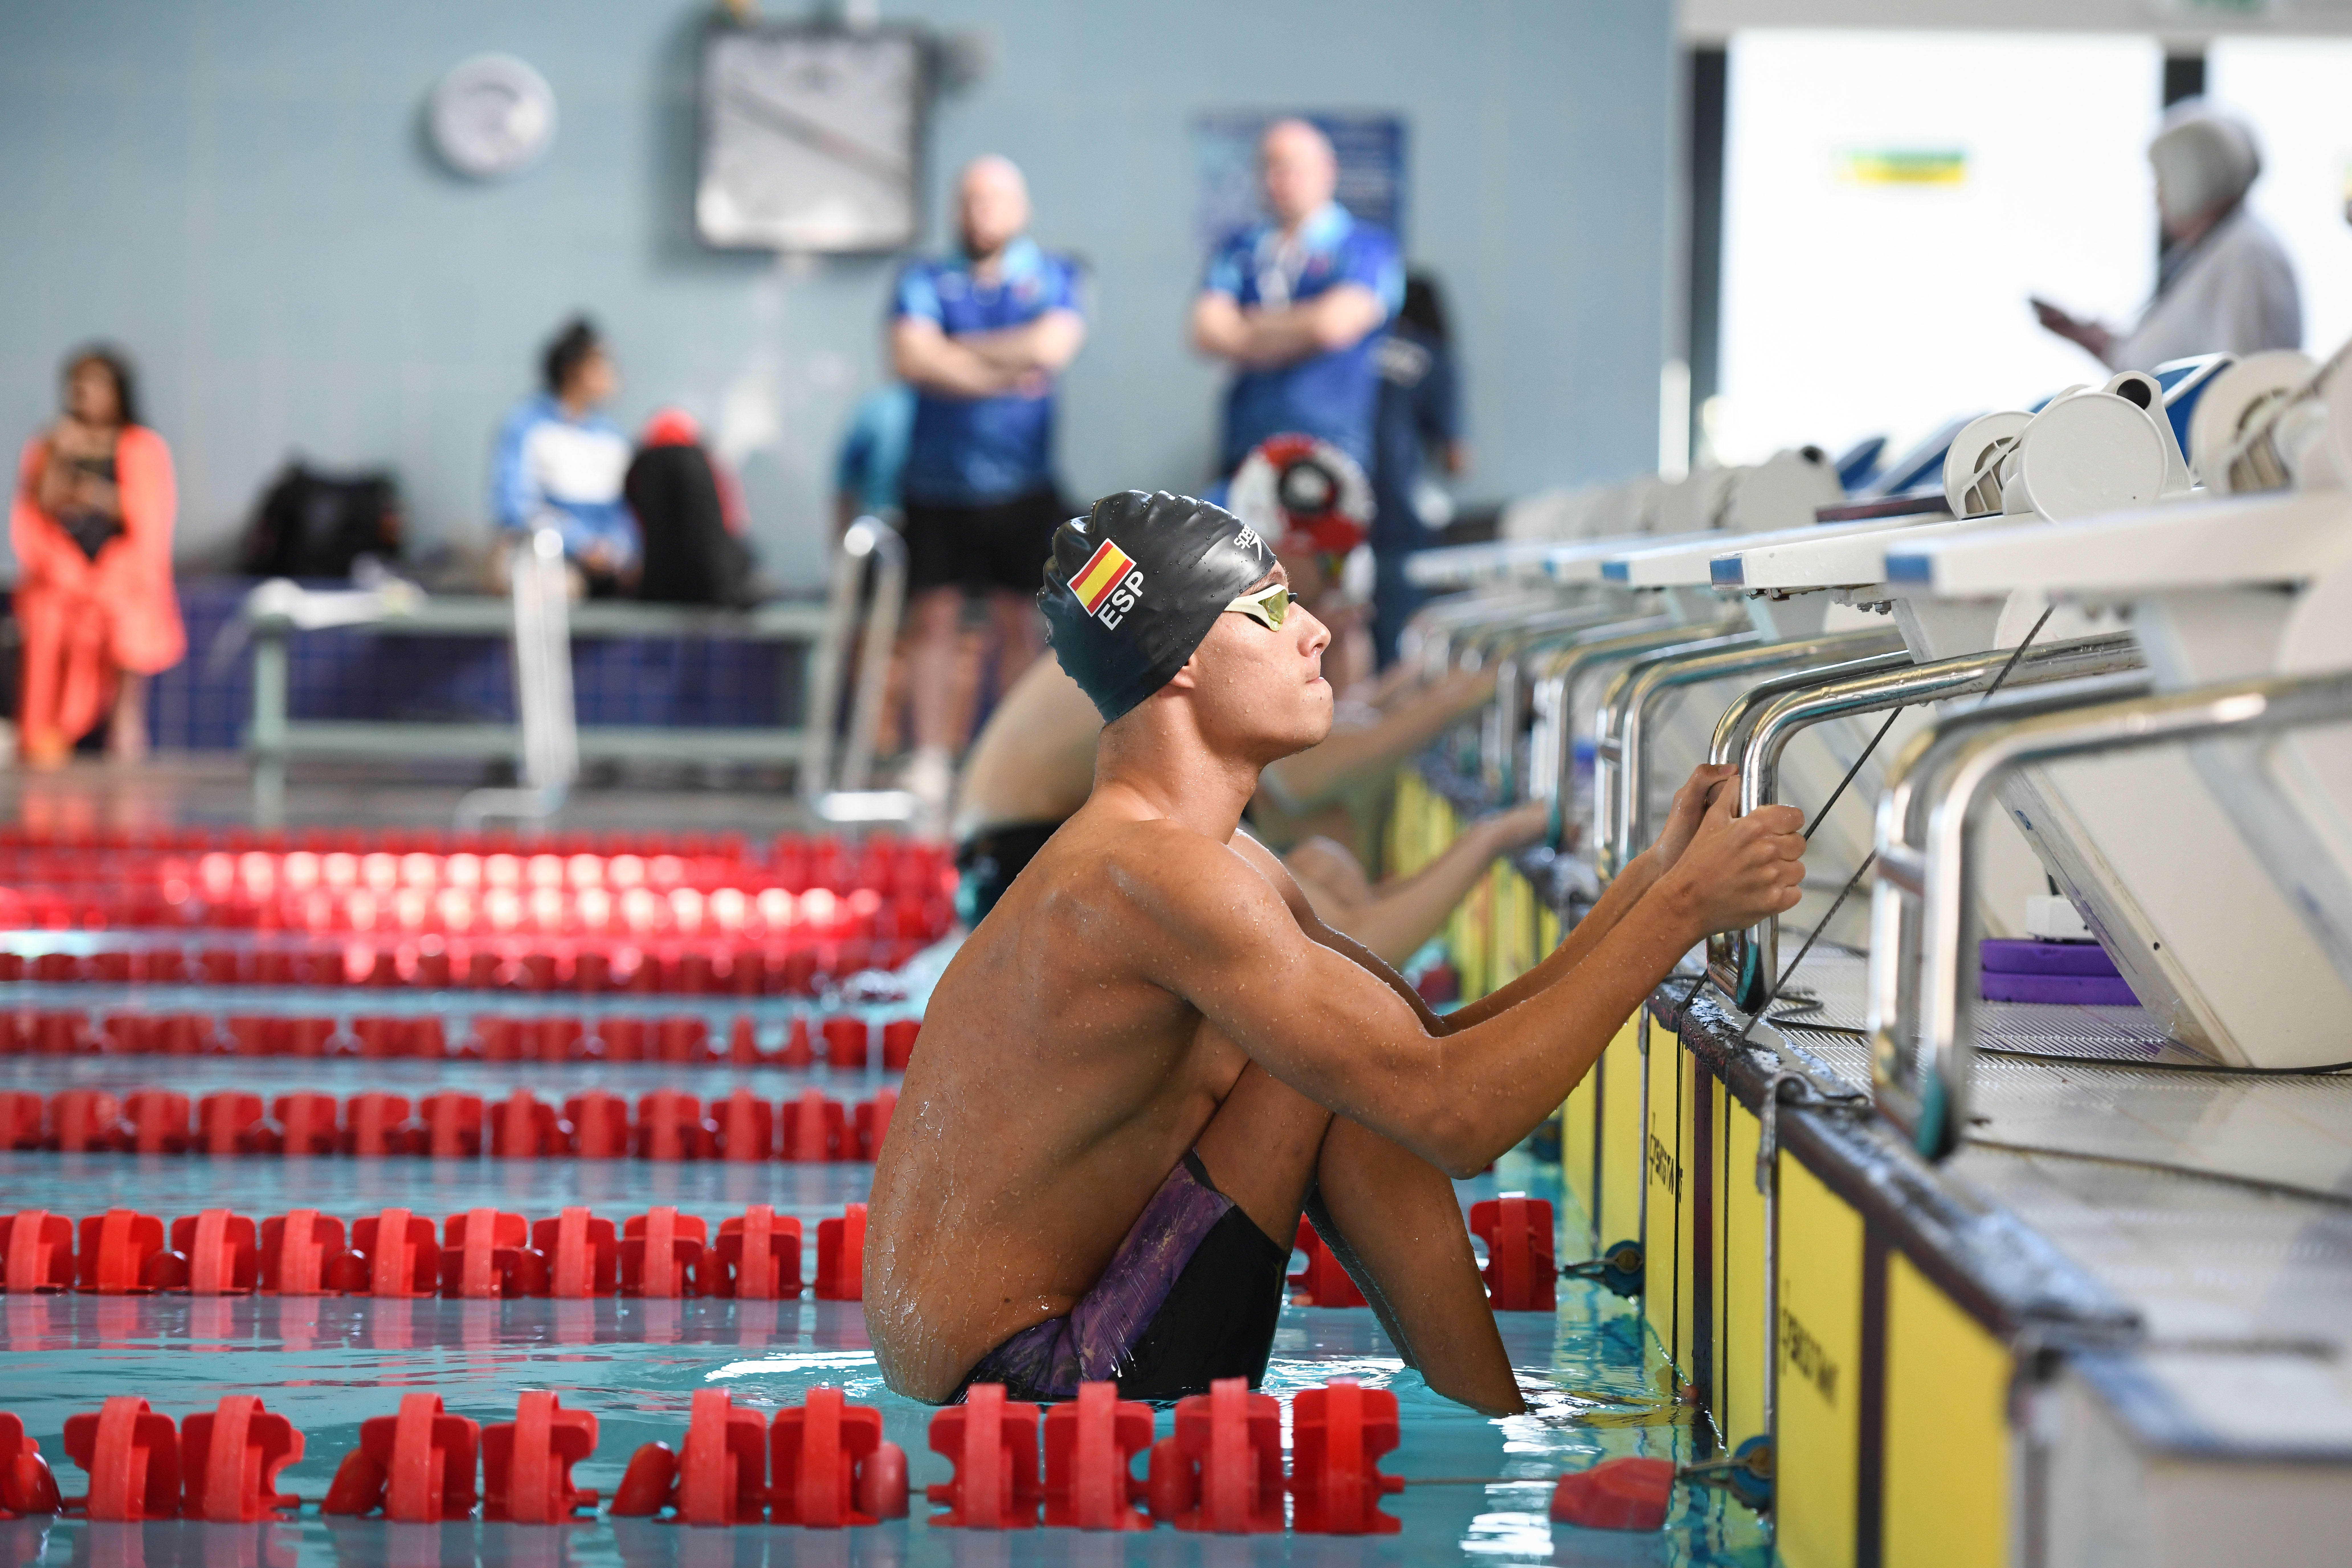 A man in a Spanish swimming cap ready to start a backstroke race in the pool.